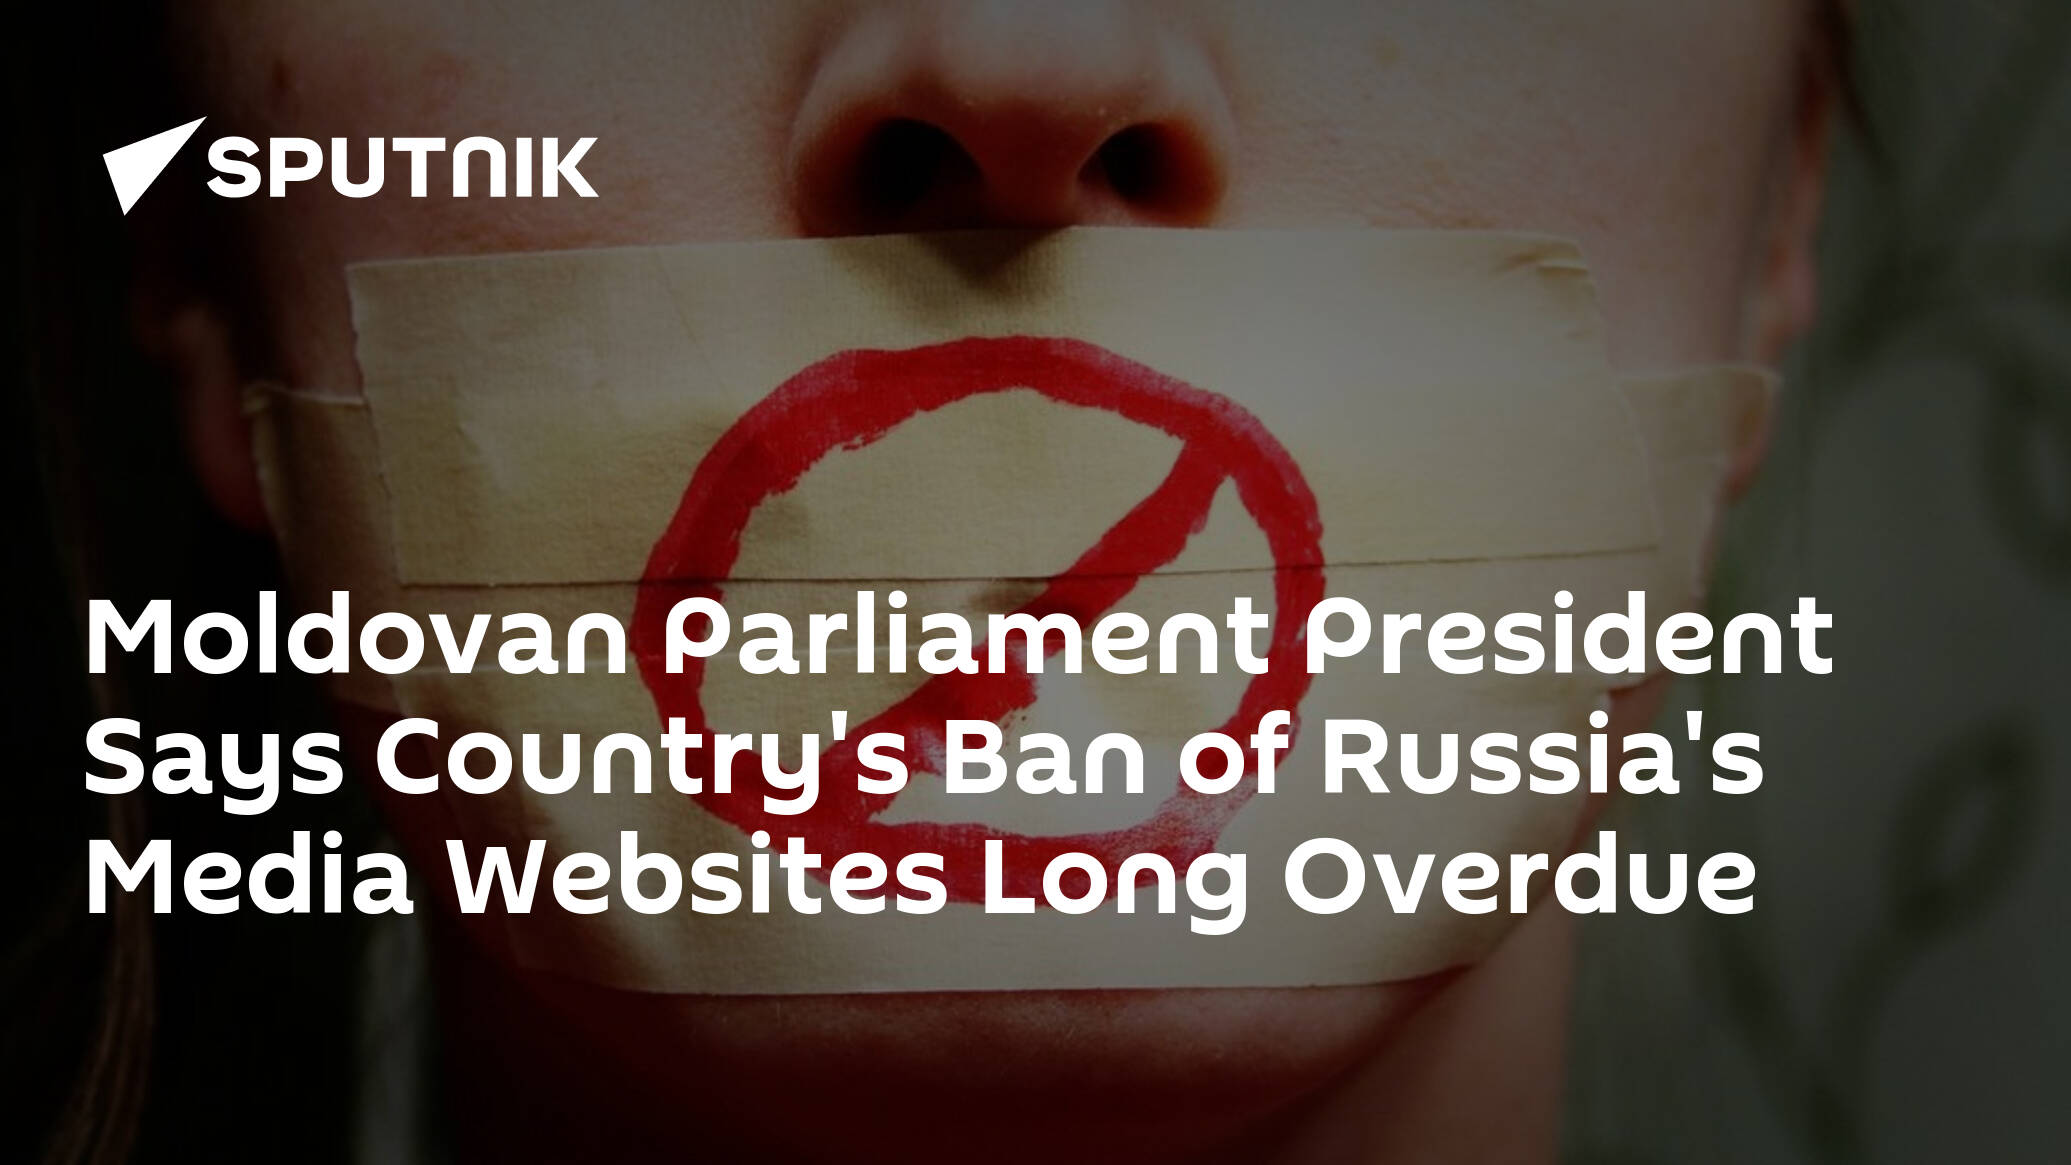 Moldovan Parliament President Says Country's Ban of Russia's Media Websites Long Overdue